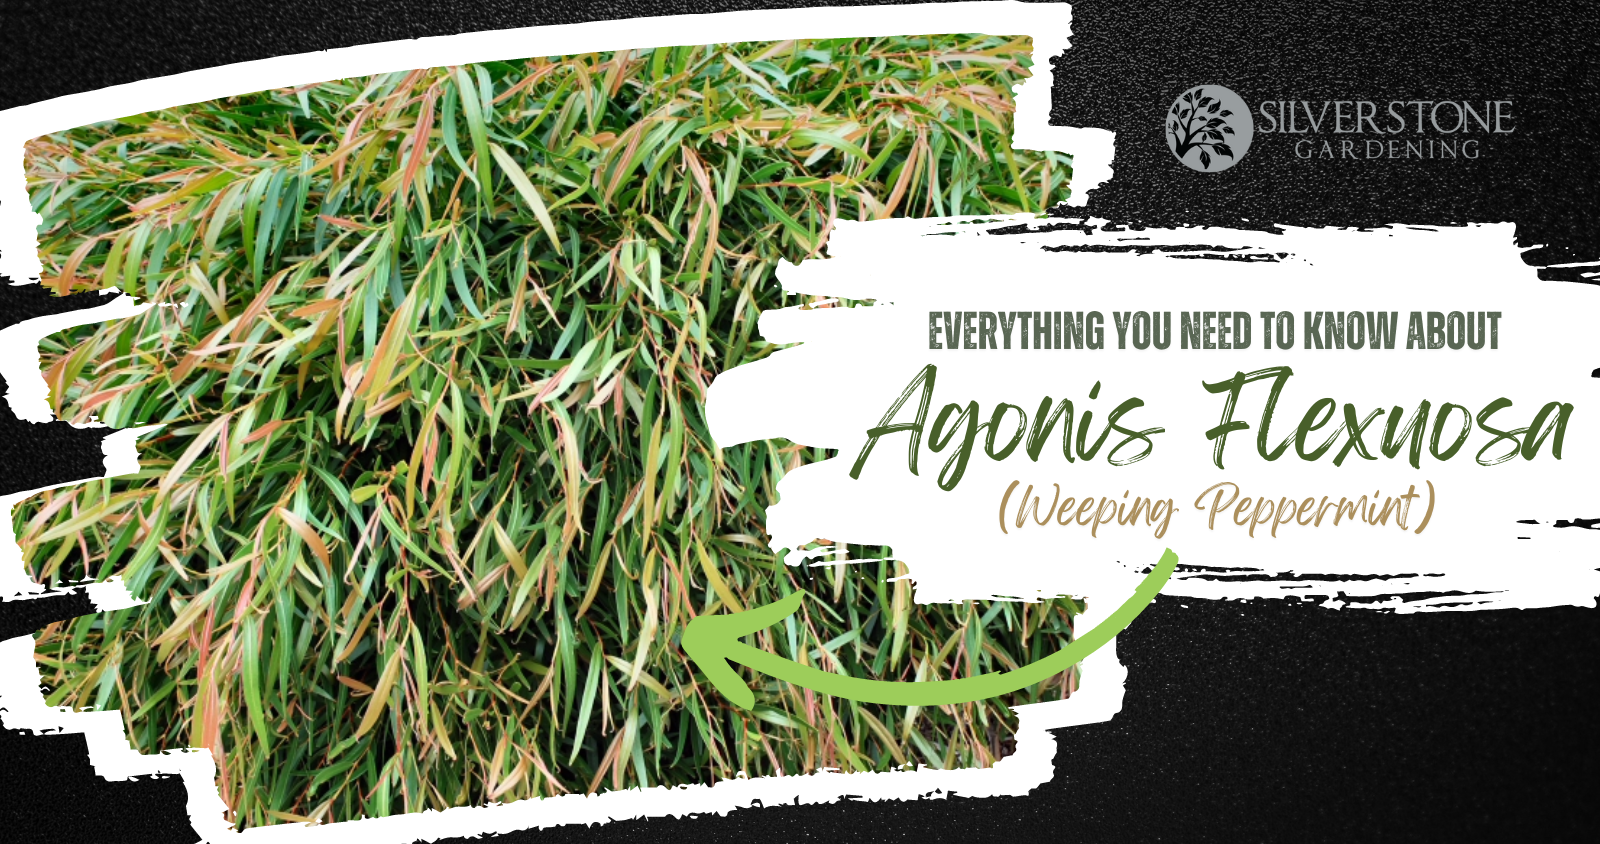 Everything you need to know about Agonis Flexuosa